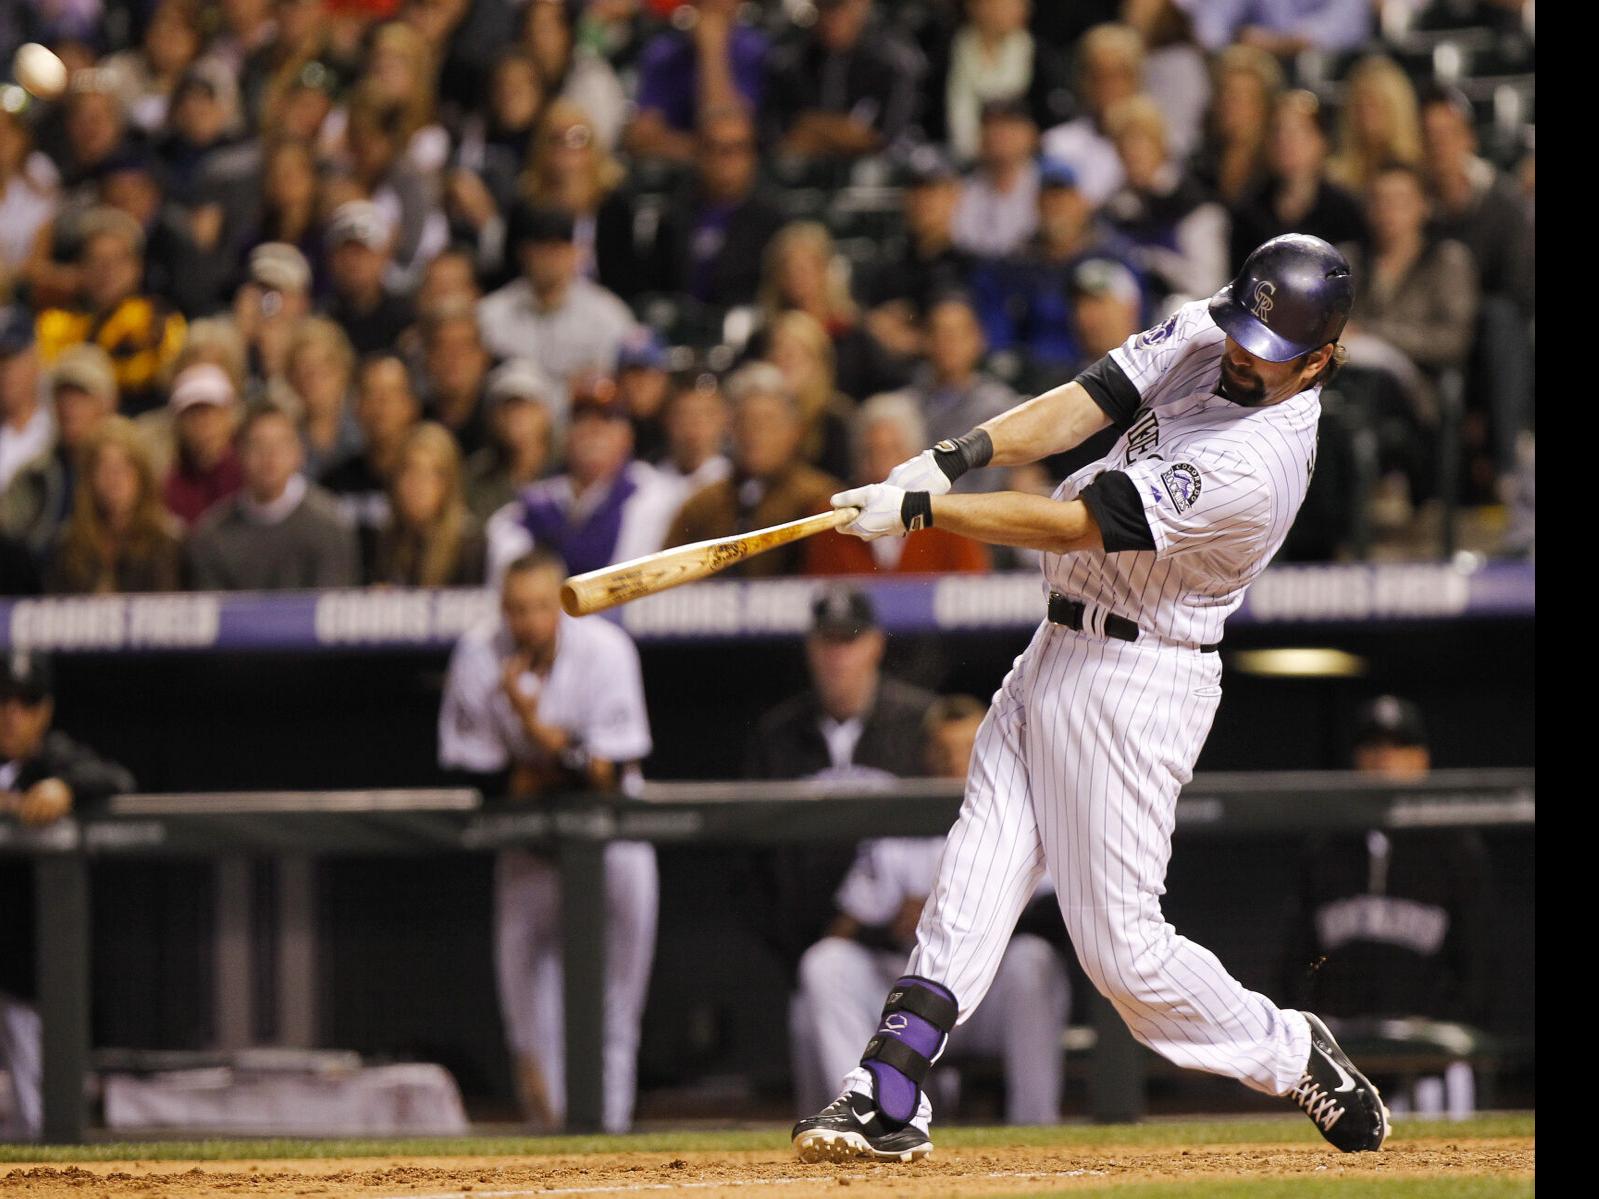 Todd Helton 2022 Hall of Fame results